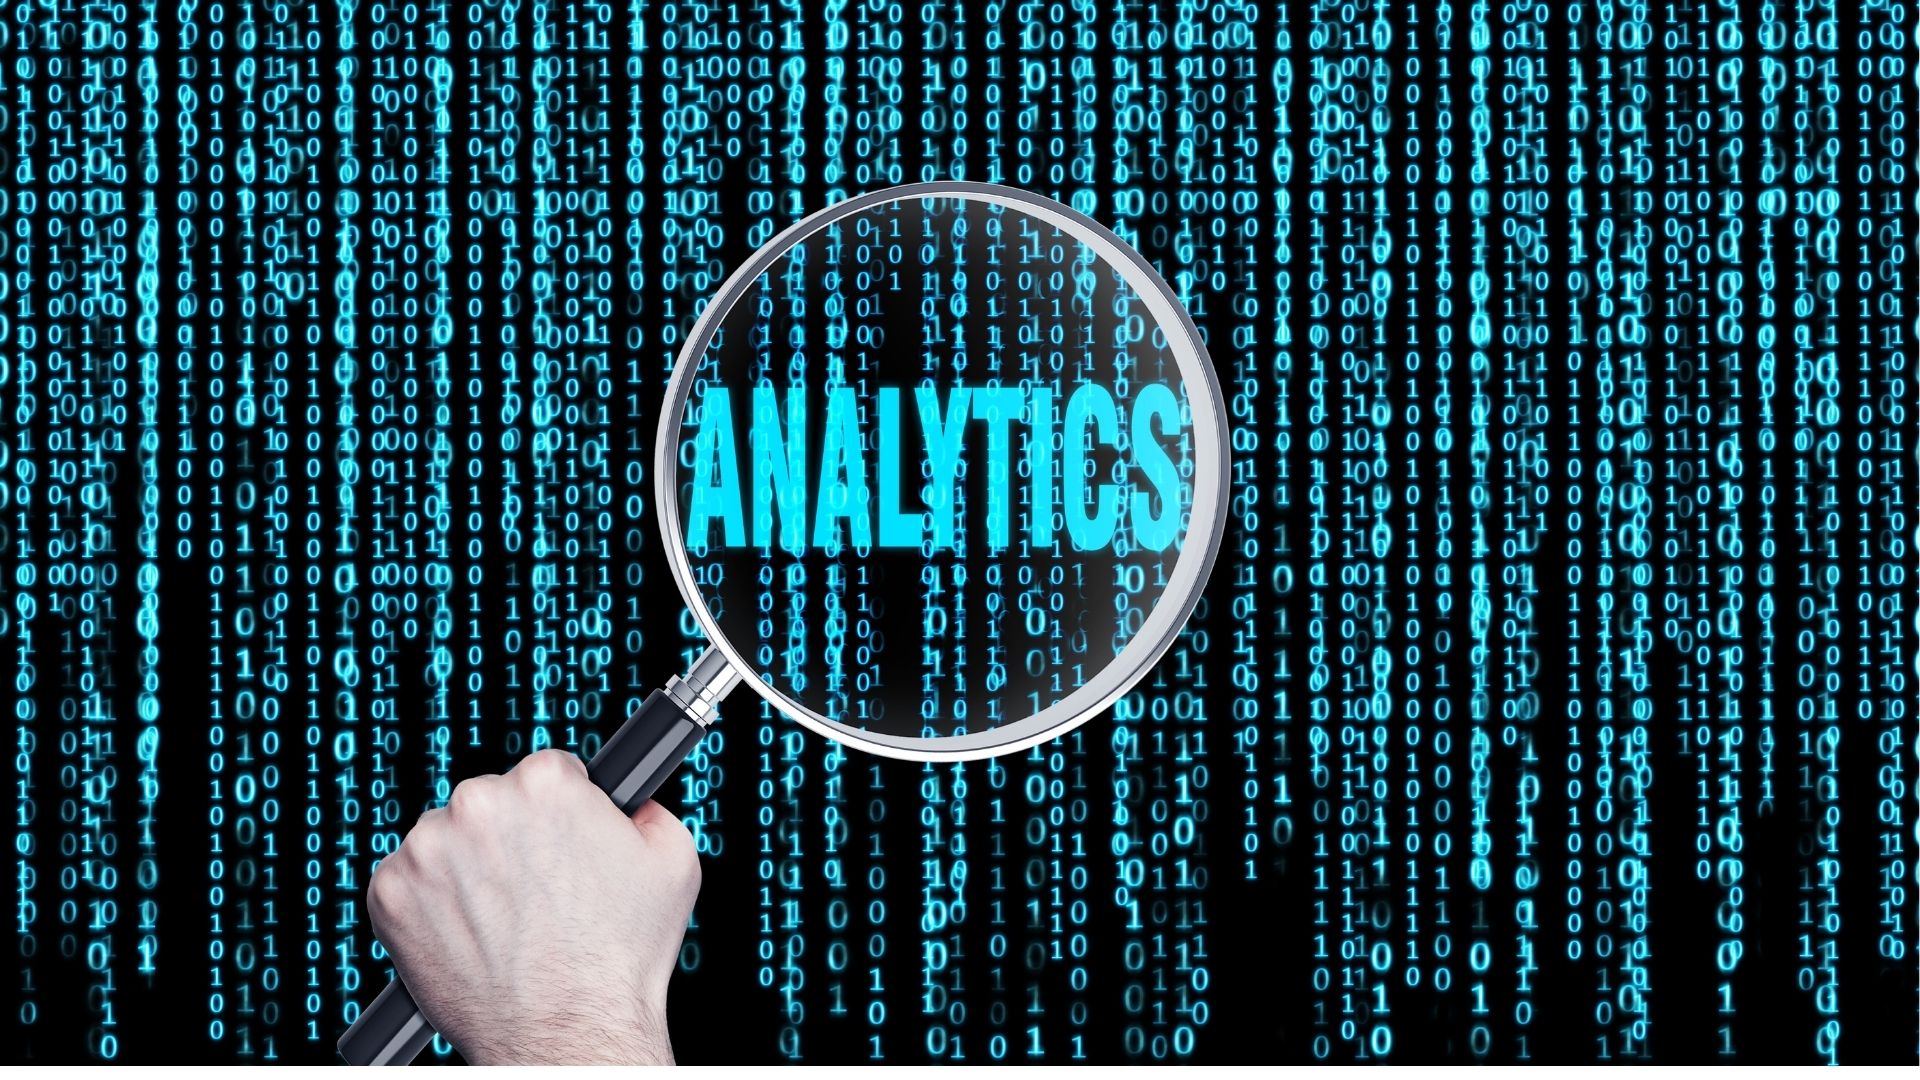 The First Survey to Analyze Government Analytics